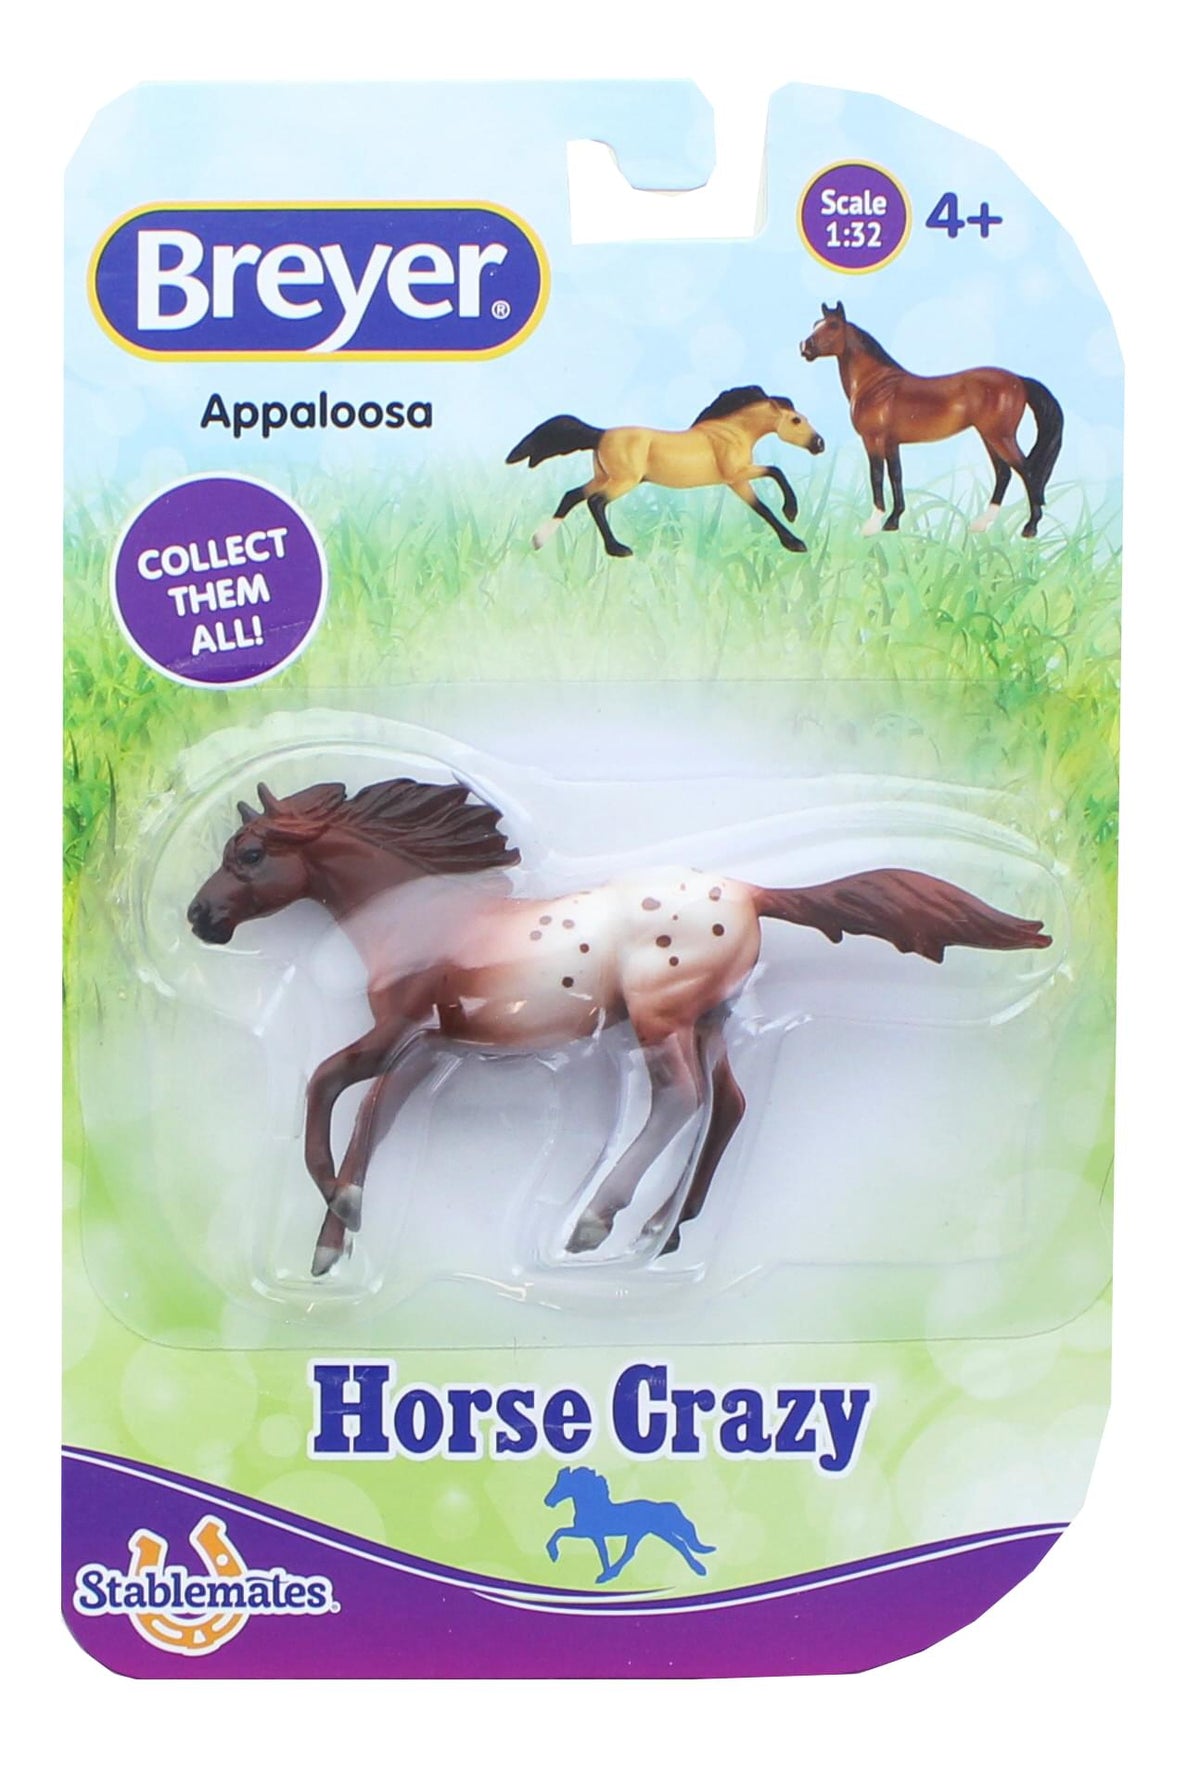 Breyer Stablemates Horse Crazy 1:32 Scale Model Horse | Appaloosa